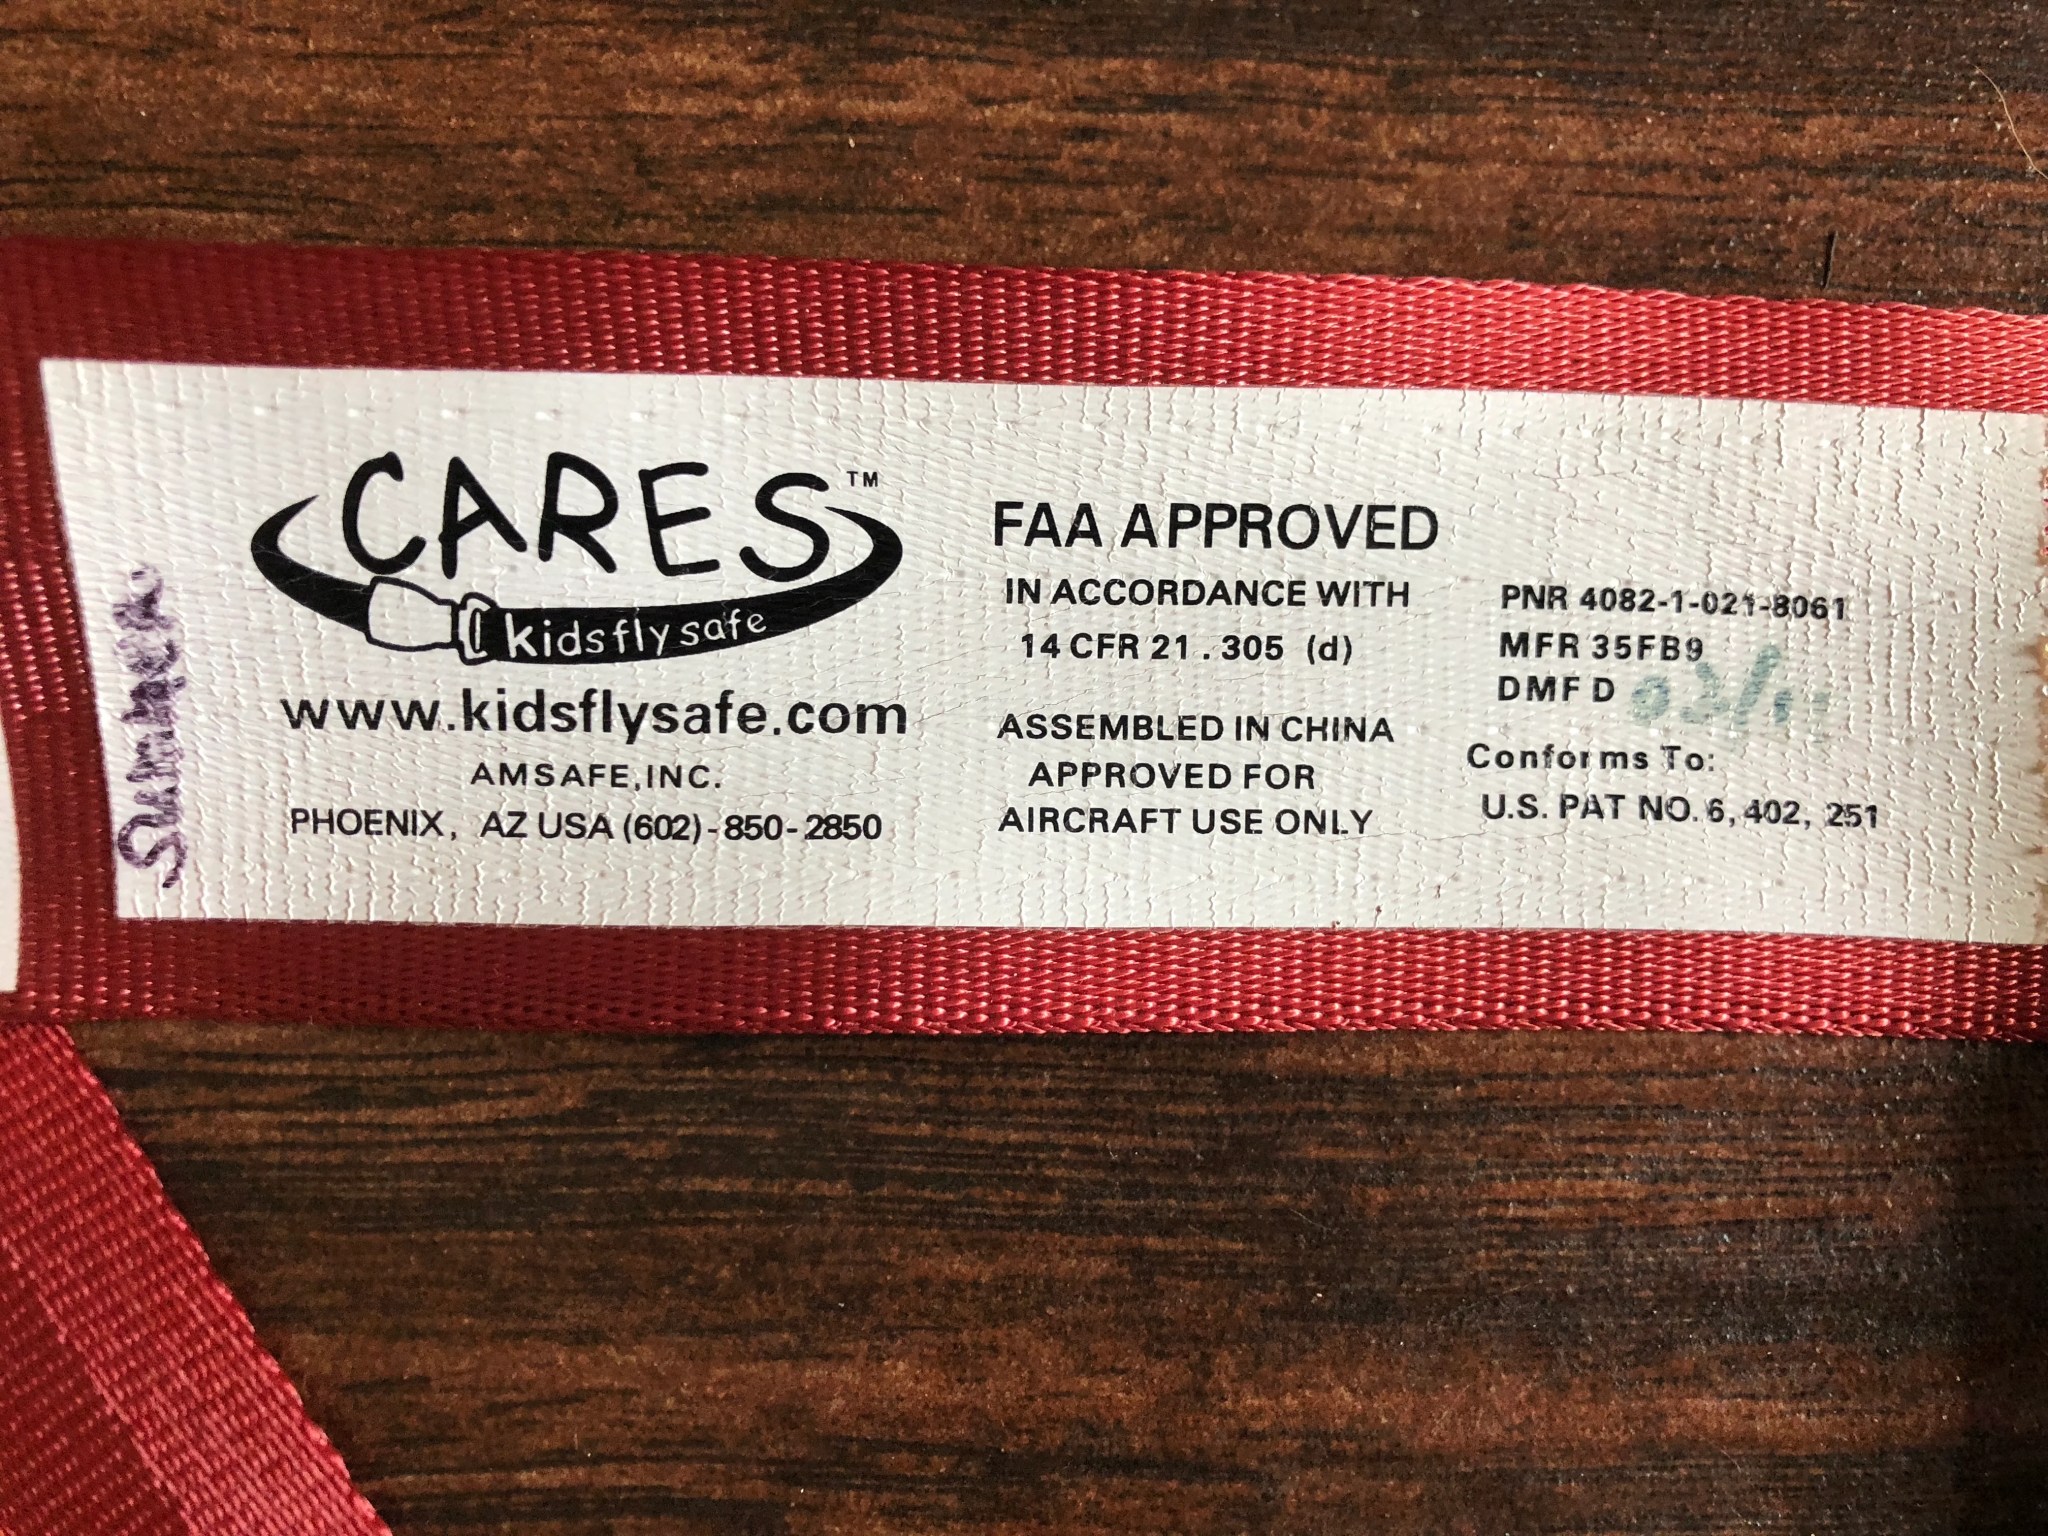 cares-harness-faa-approved.jpg